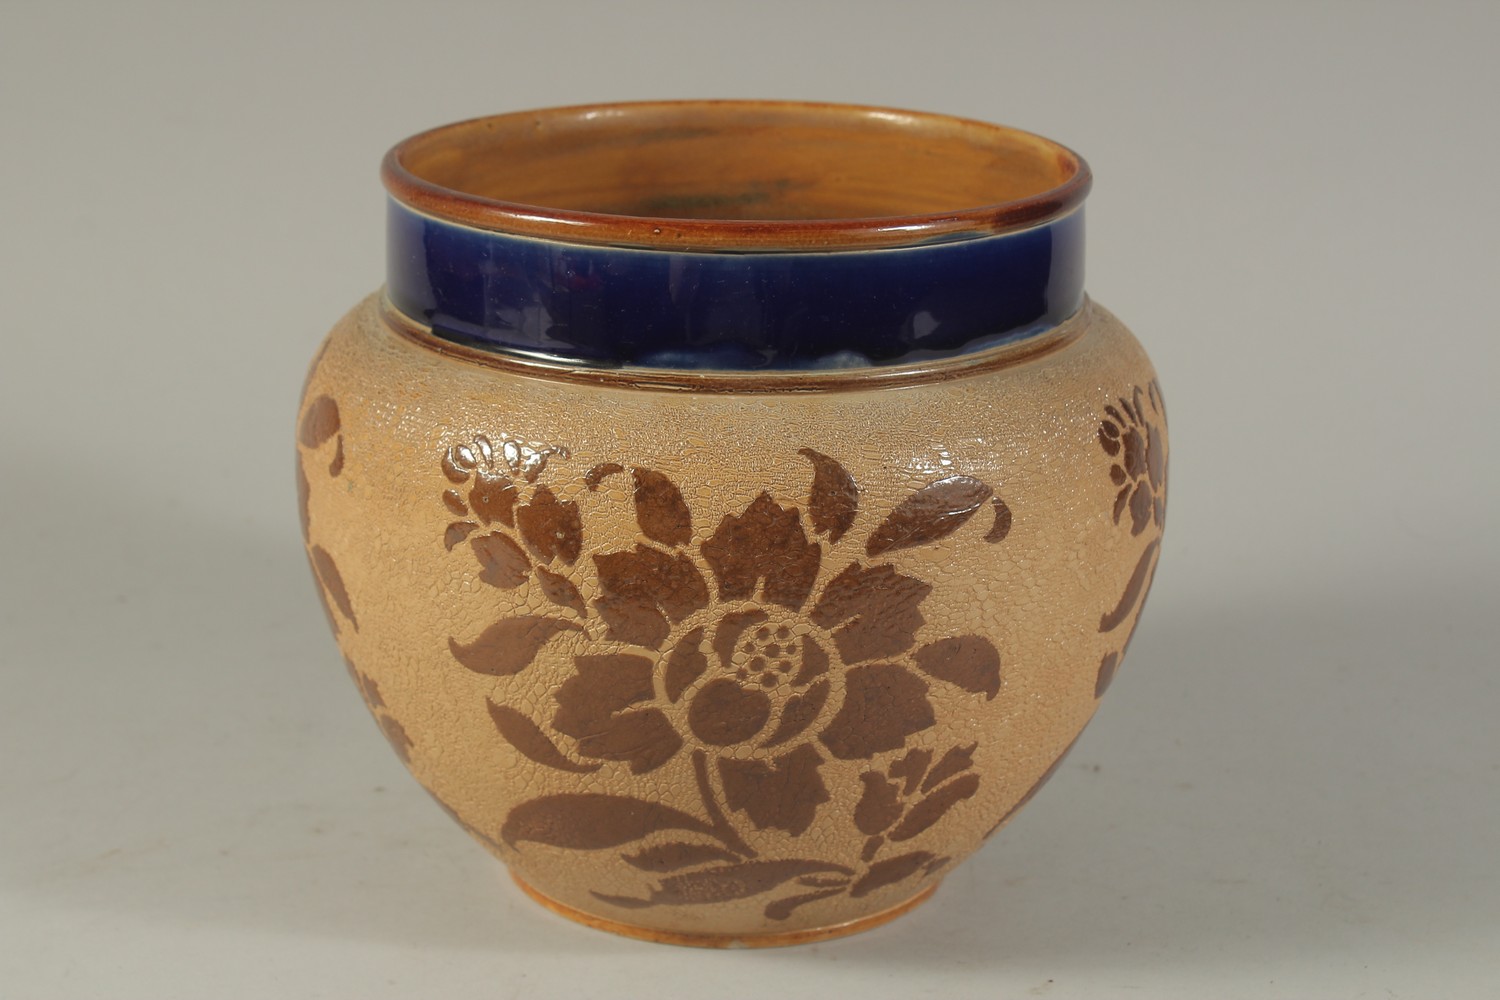 A ROYAL DOULTON SLATERS PATENT STONEWARE CIRCULAR JARDINIERE with blue rim, the body with leaves. - Image 2 of 5